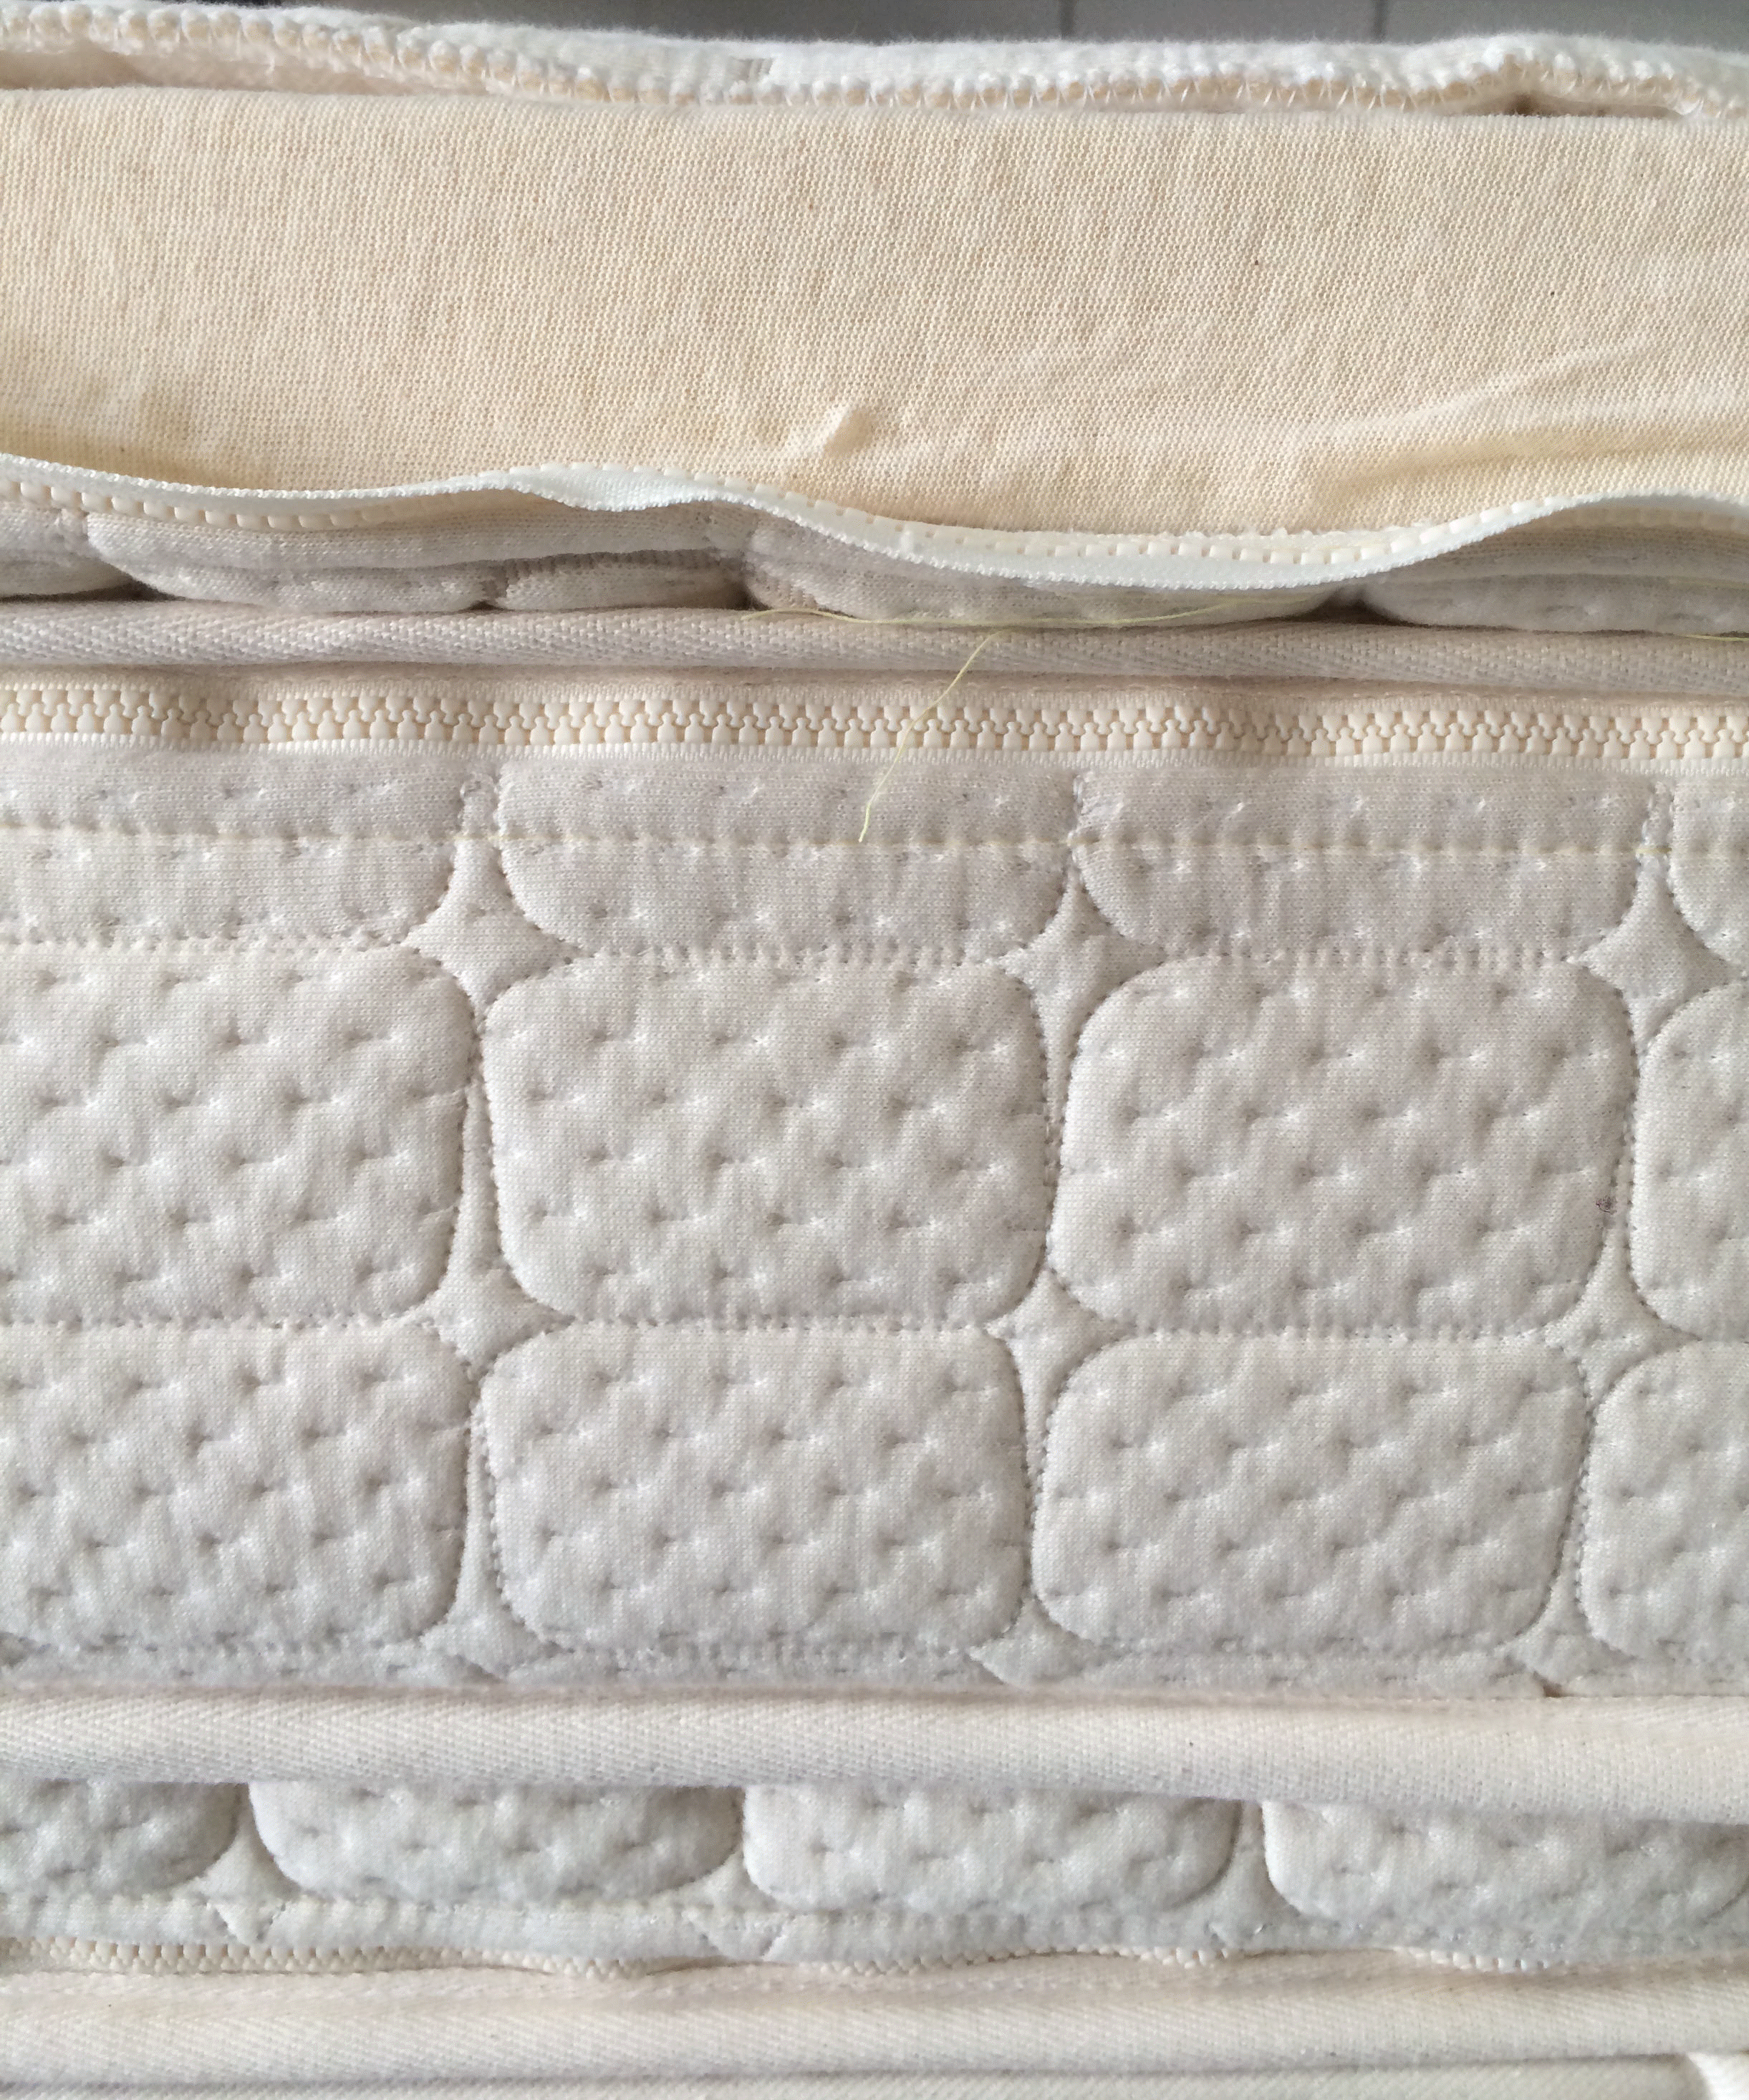 The Natural Latex Mattress best quality highest rated